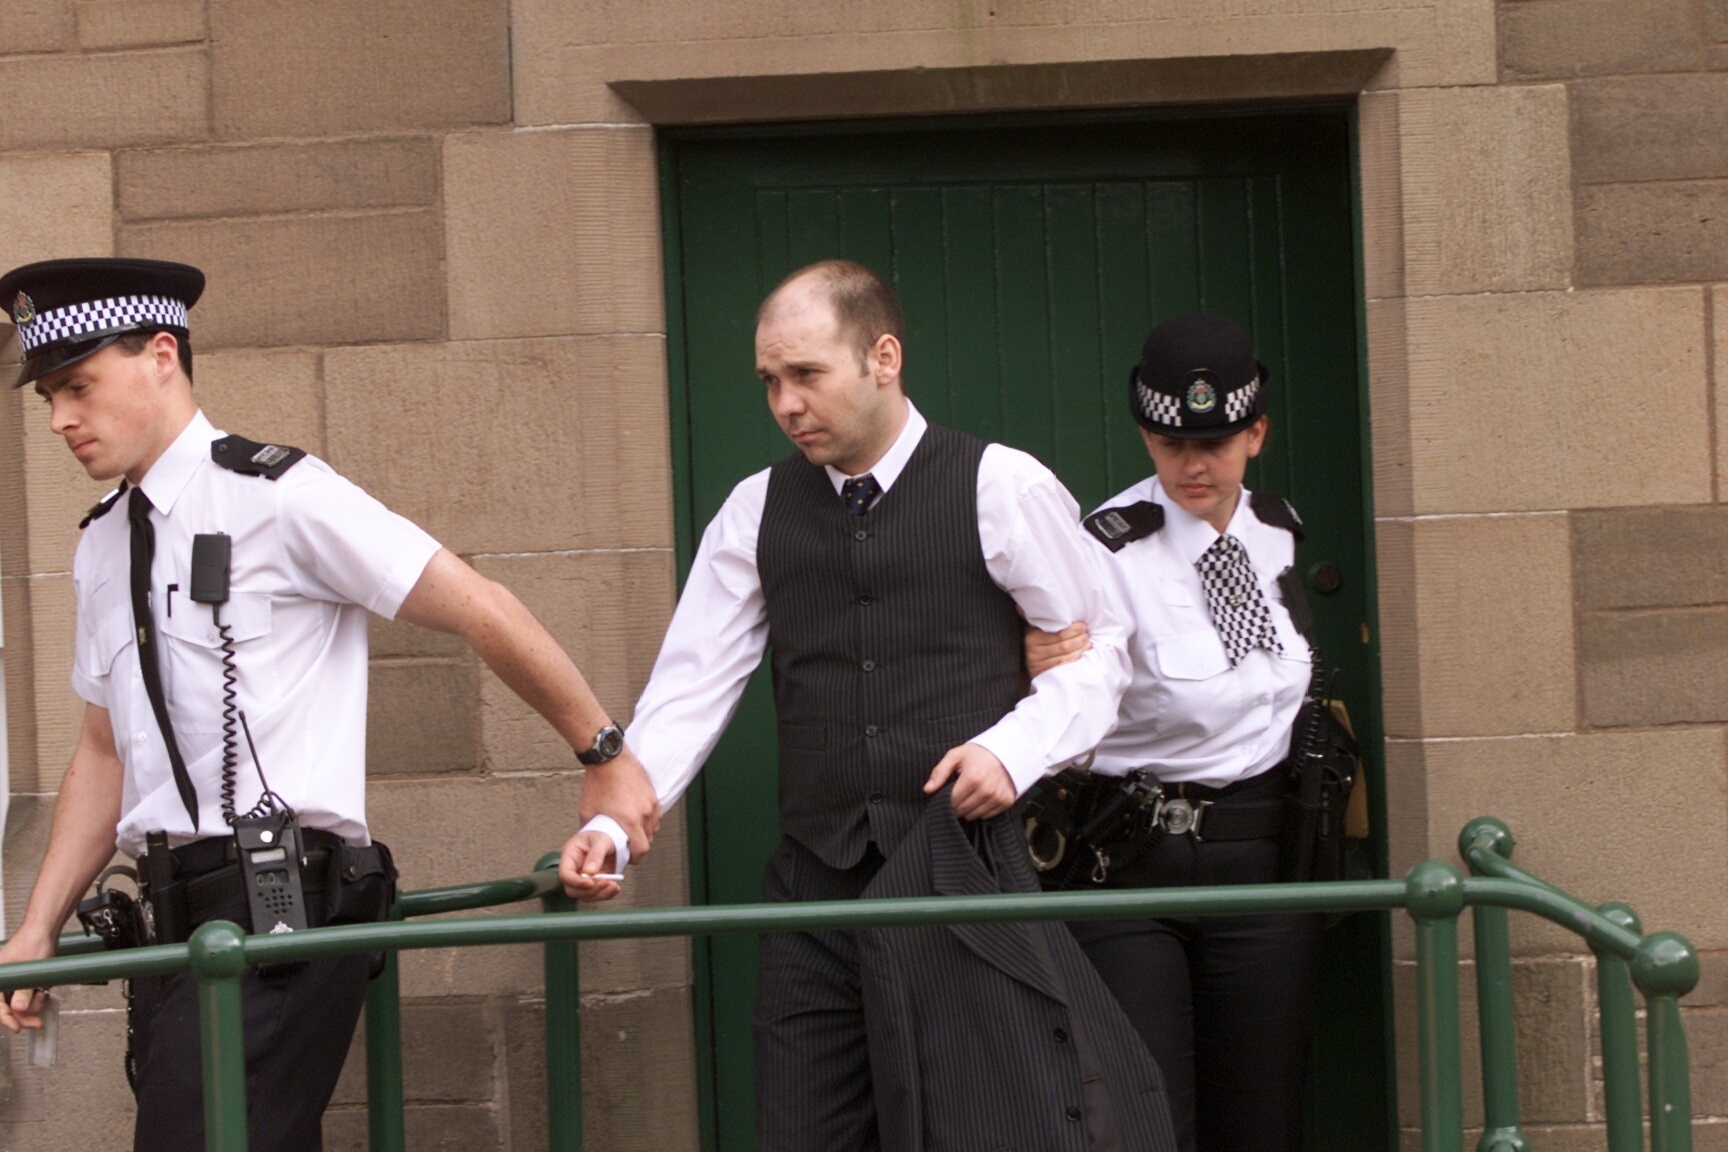 David Roache being taken from Forfar Court to begin his sentence for murder in 2002.